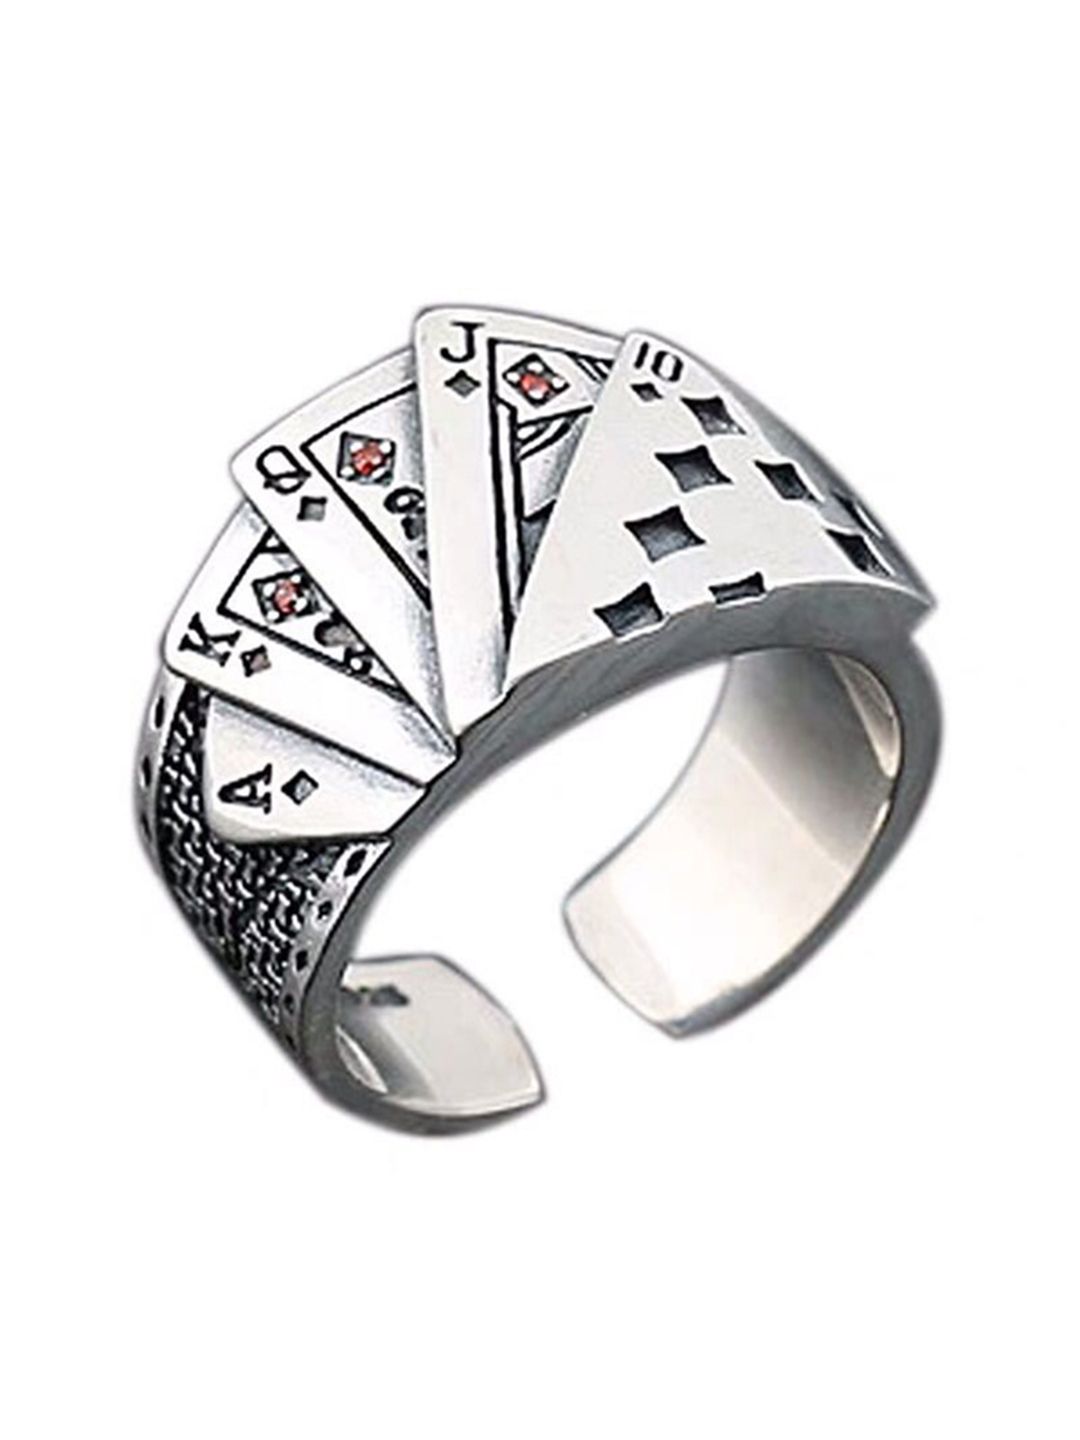 Sarvda Silver-Plated Adjustable Finger Ring Price in India